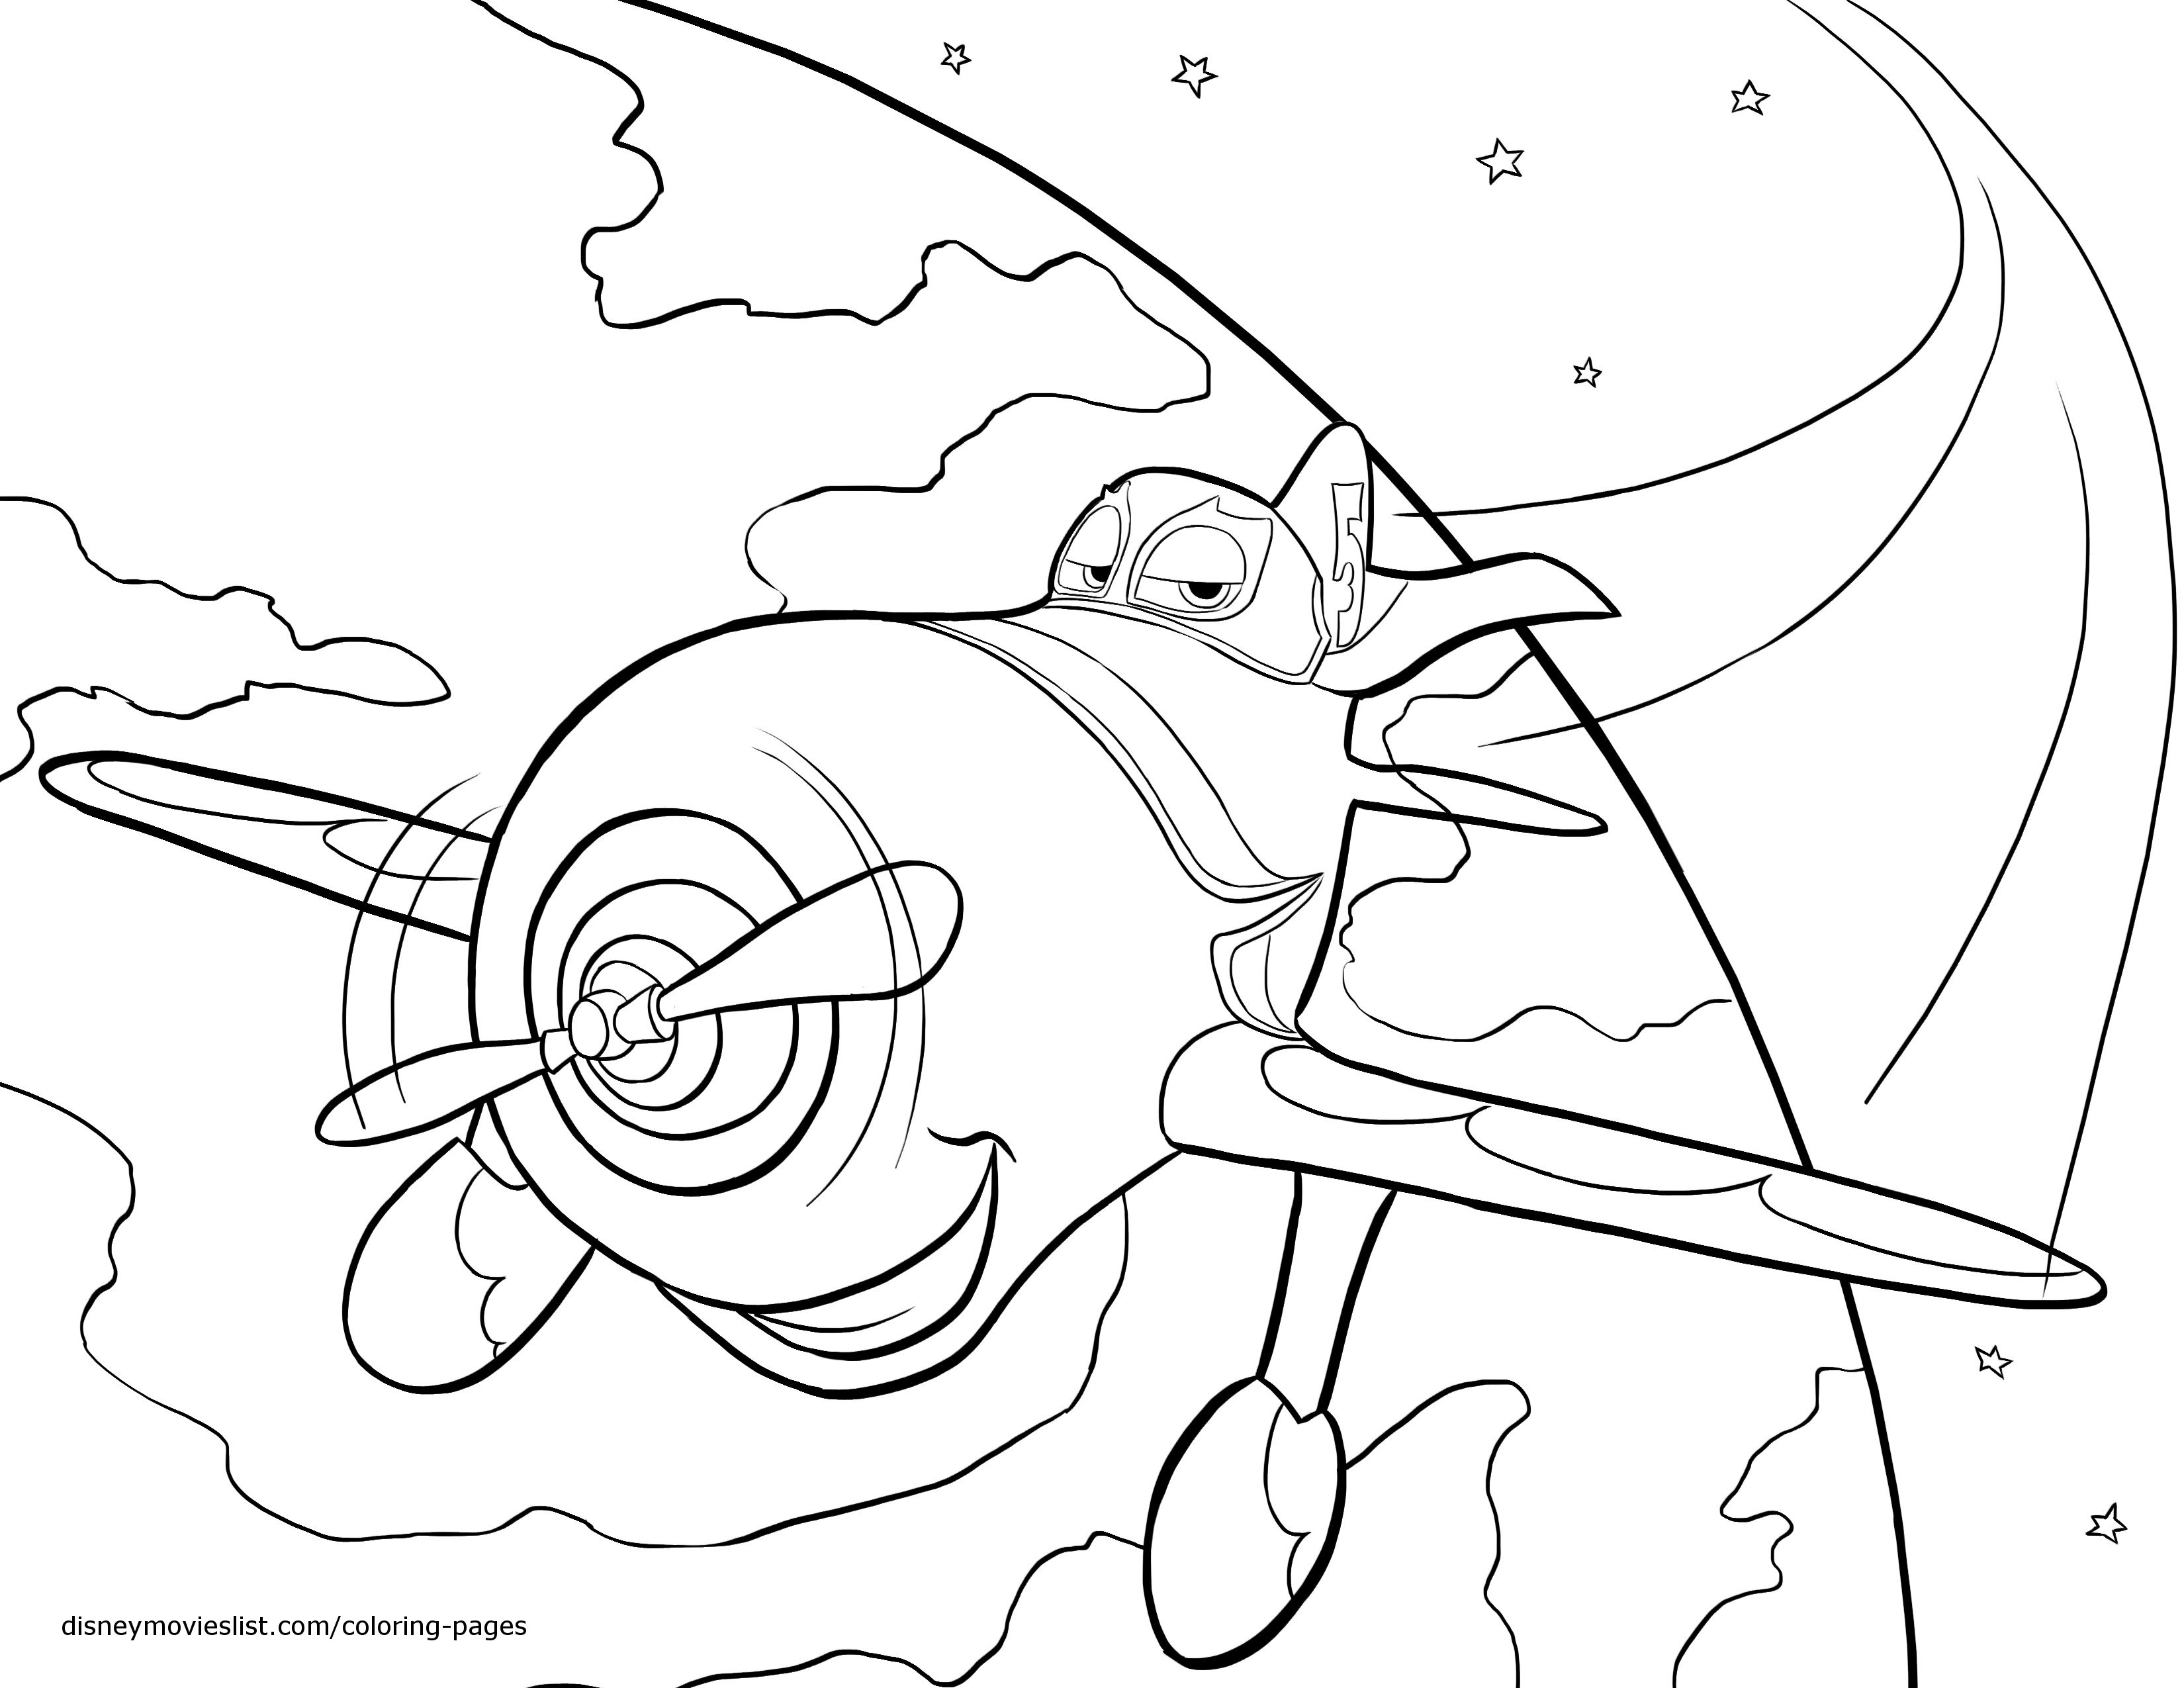 Plane coloring pages to download and print for free